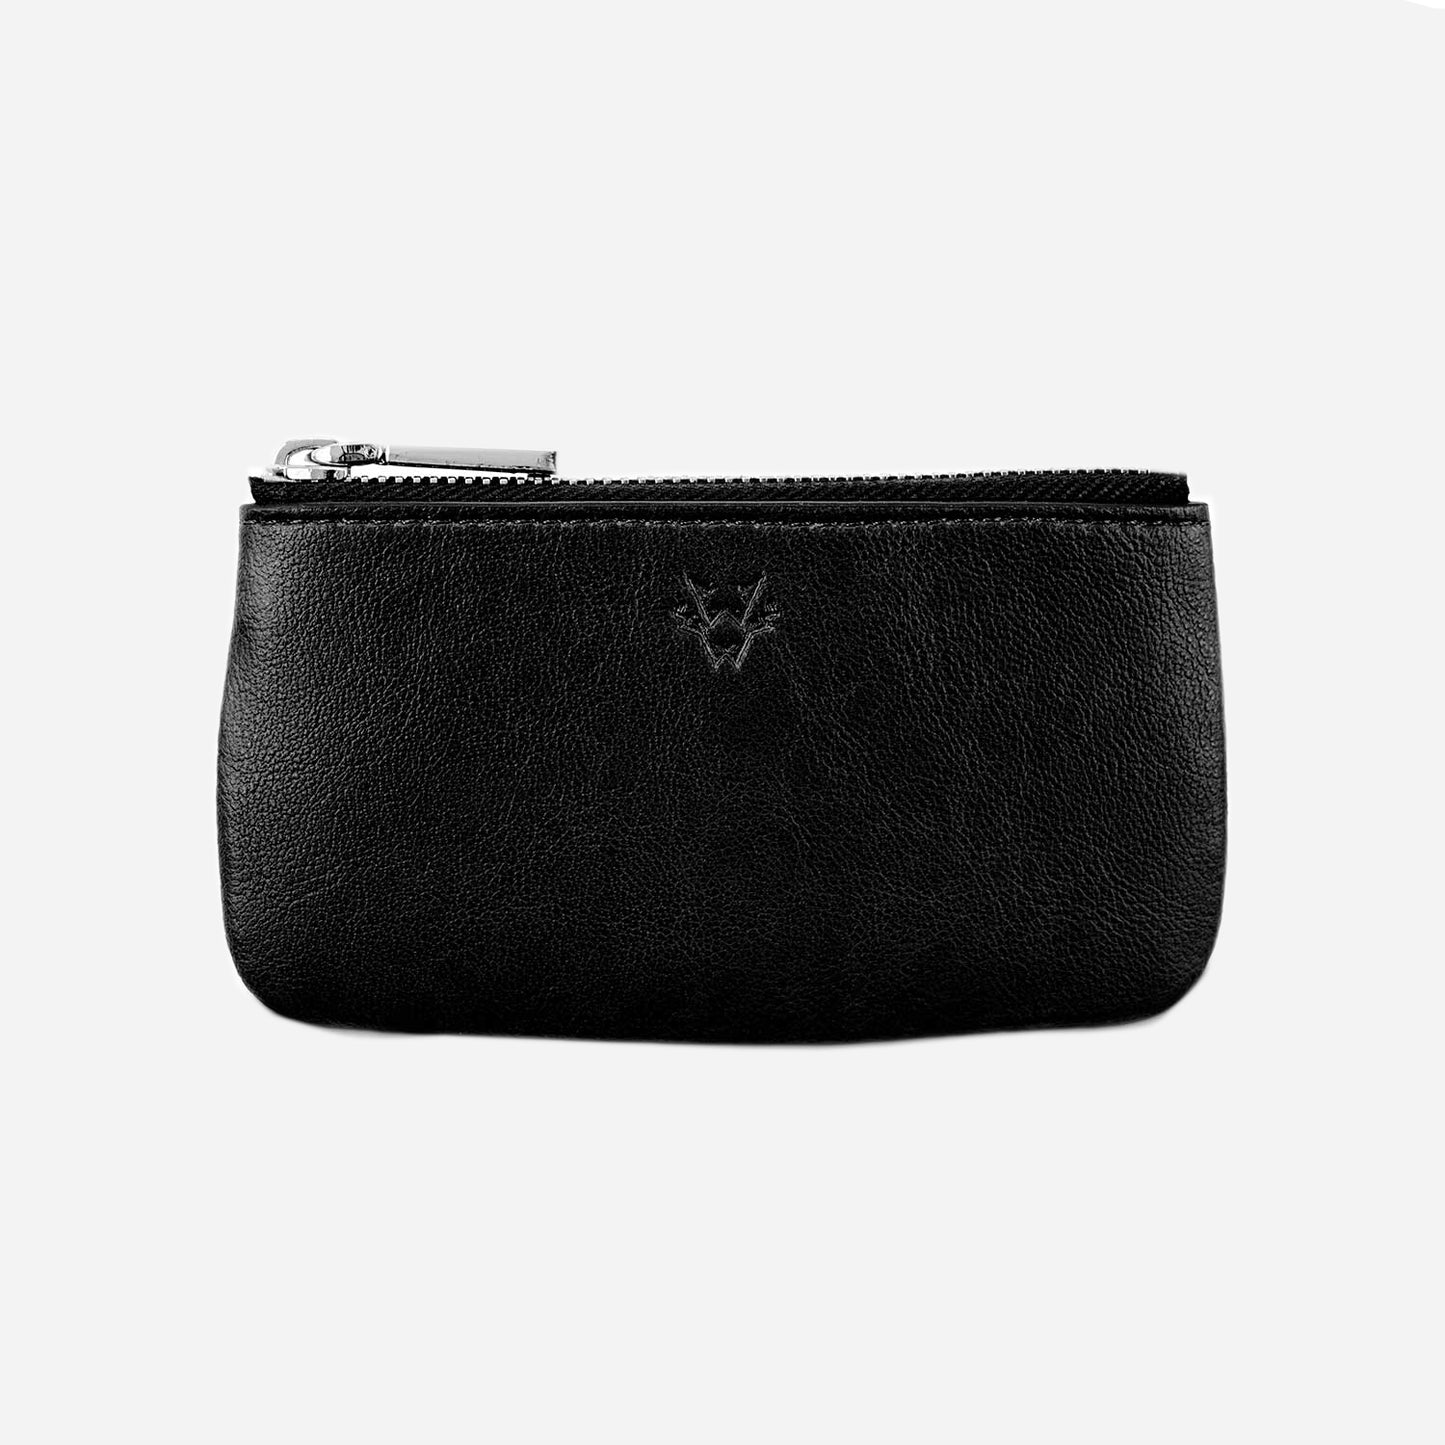 Zipped Coin Purse in Vegan Leather with Key Chain